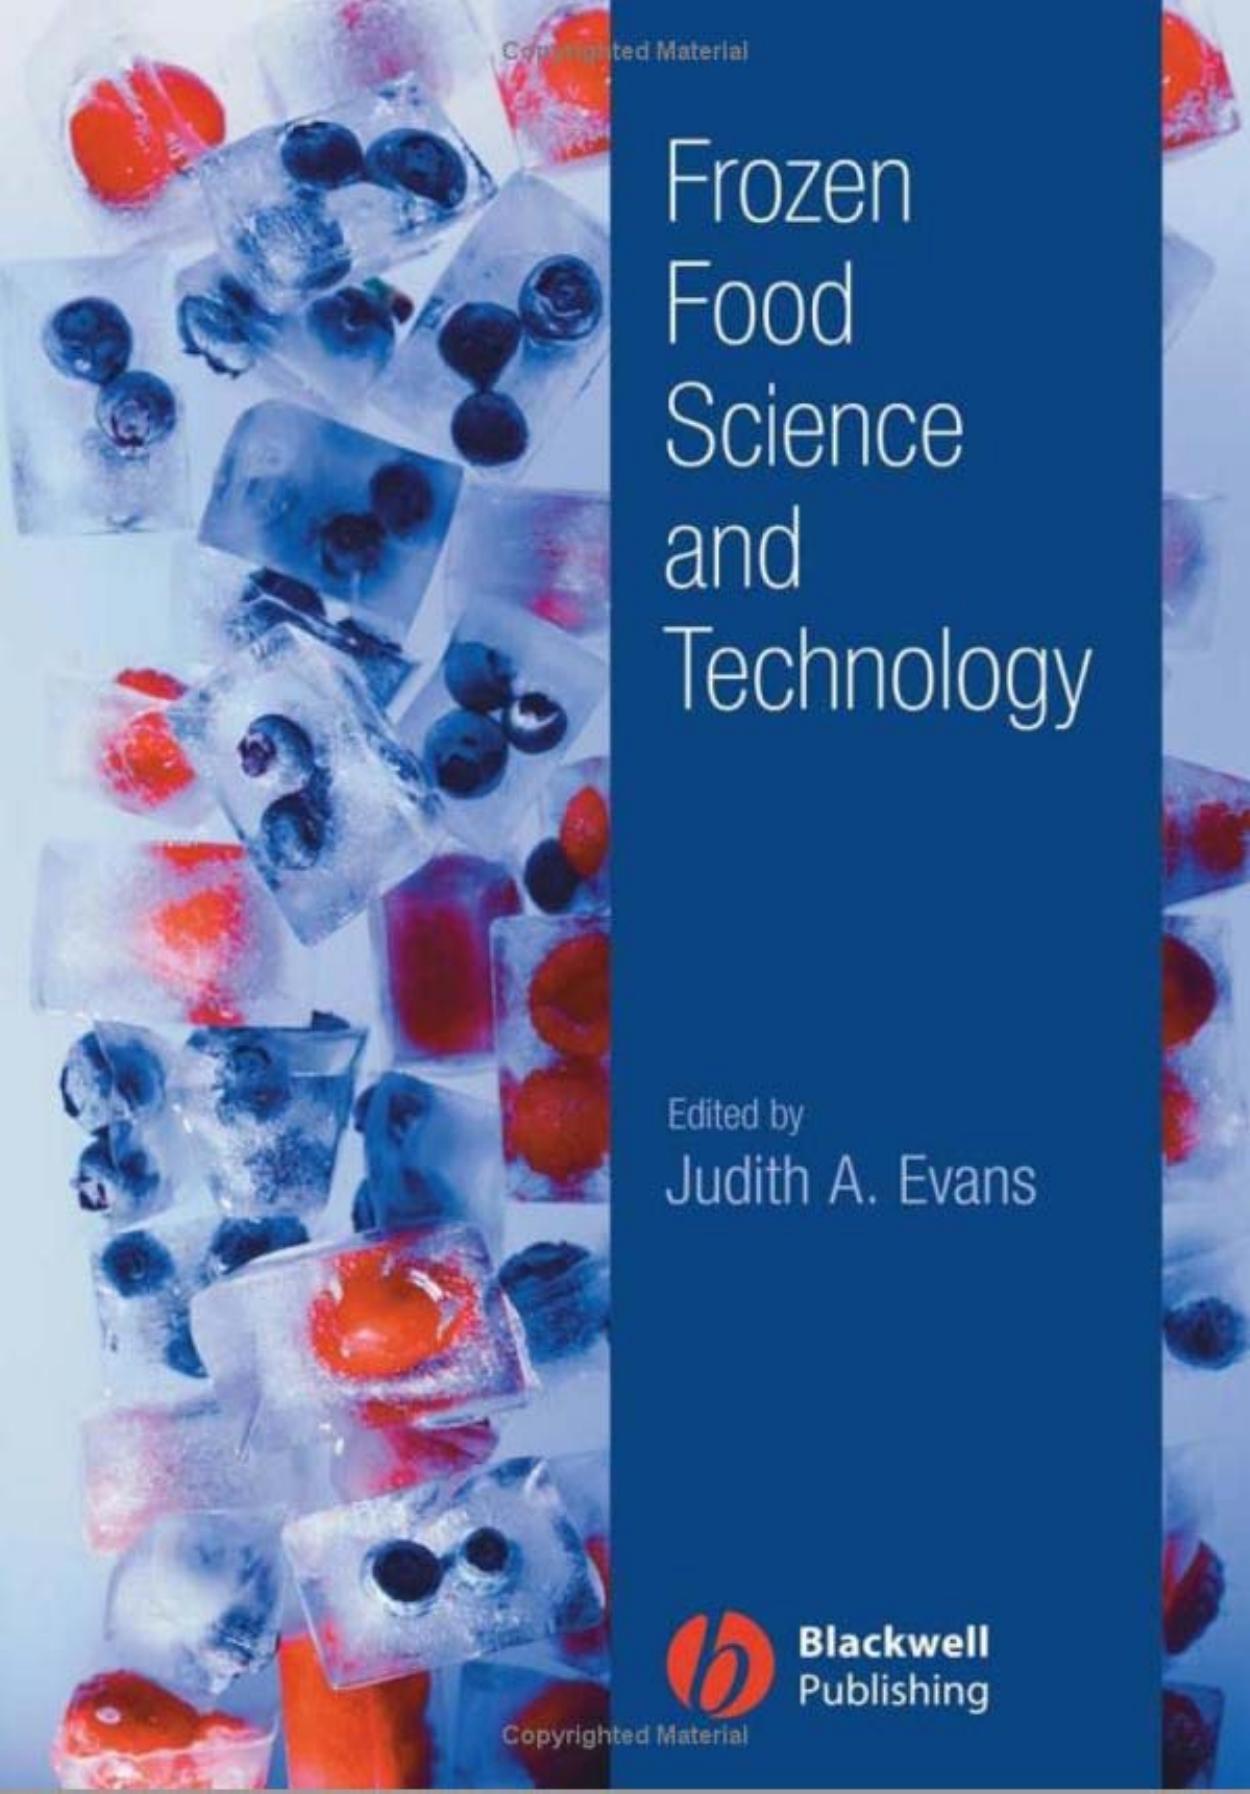 Frozen Food Science and Technology 2008 (2)